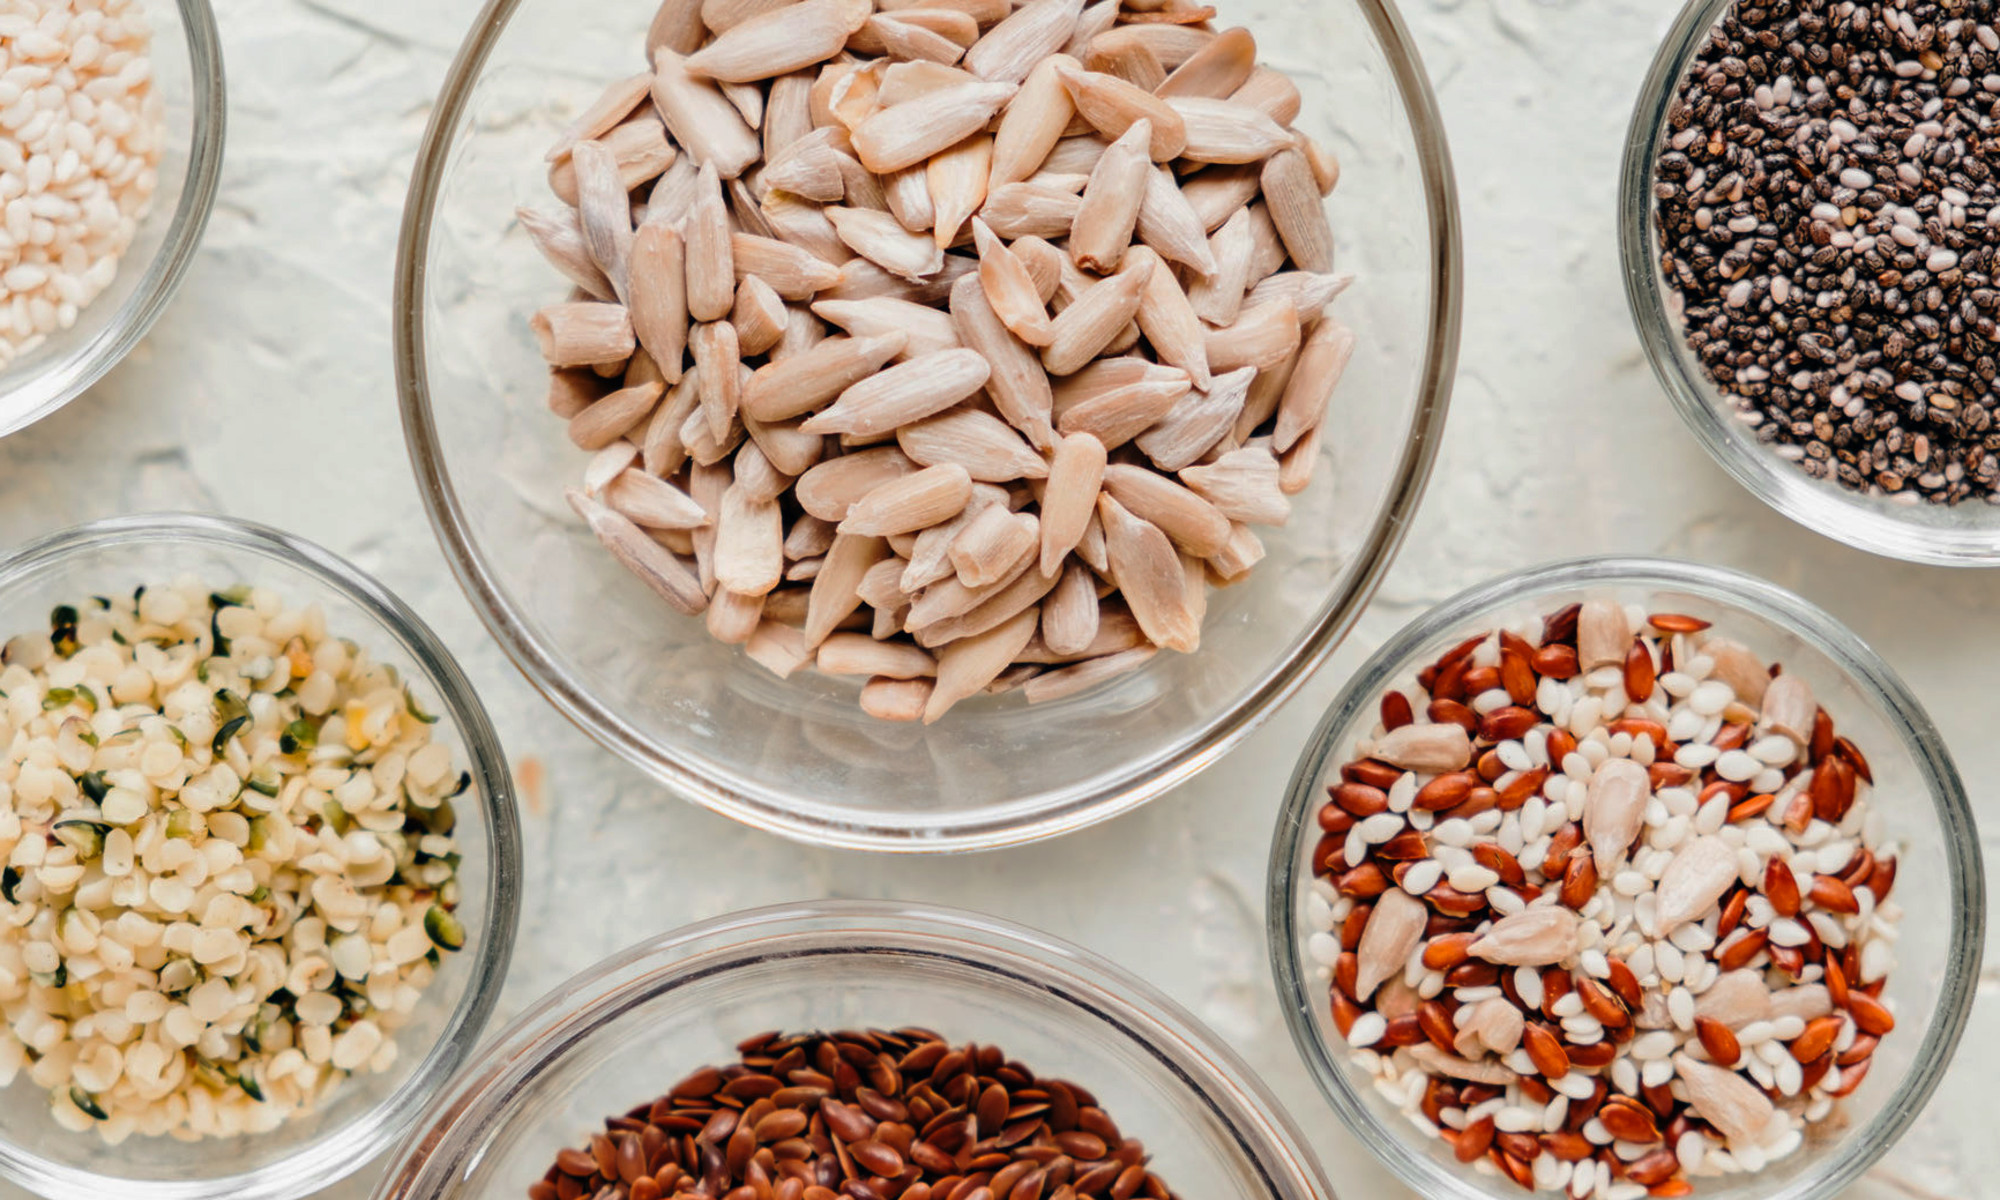 Nutritionists Love To Use This Stealthy Seed To Sneak More Fiber Into Meals